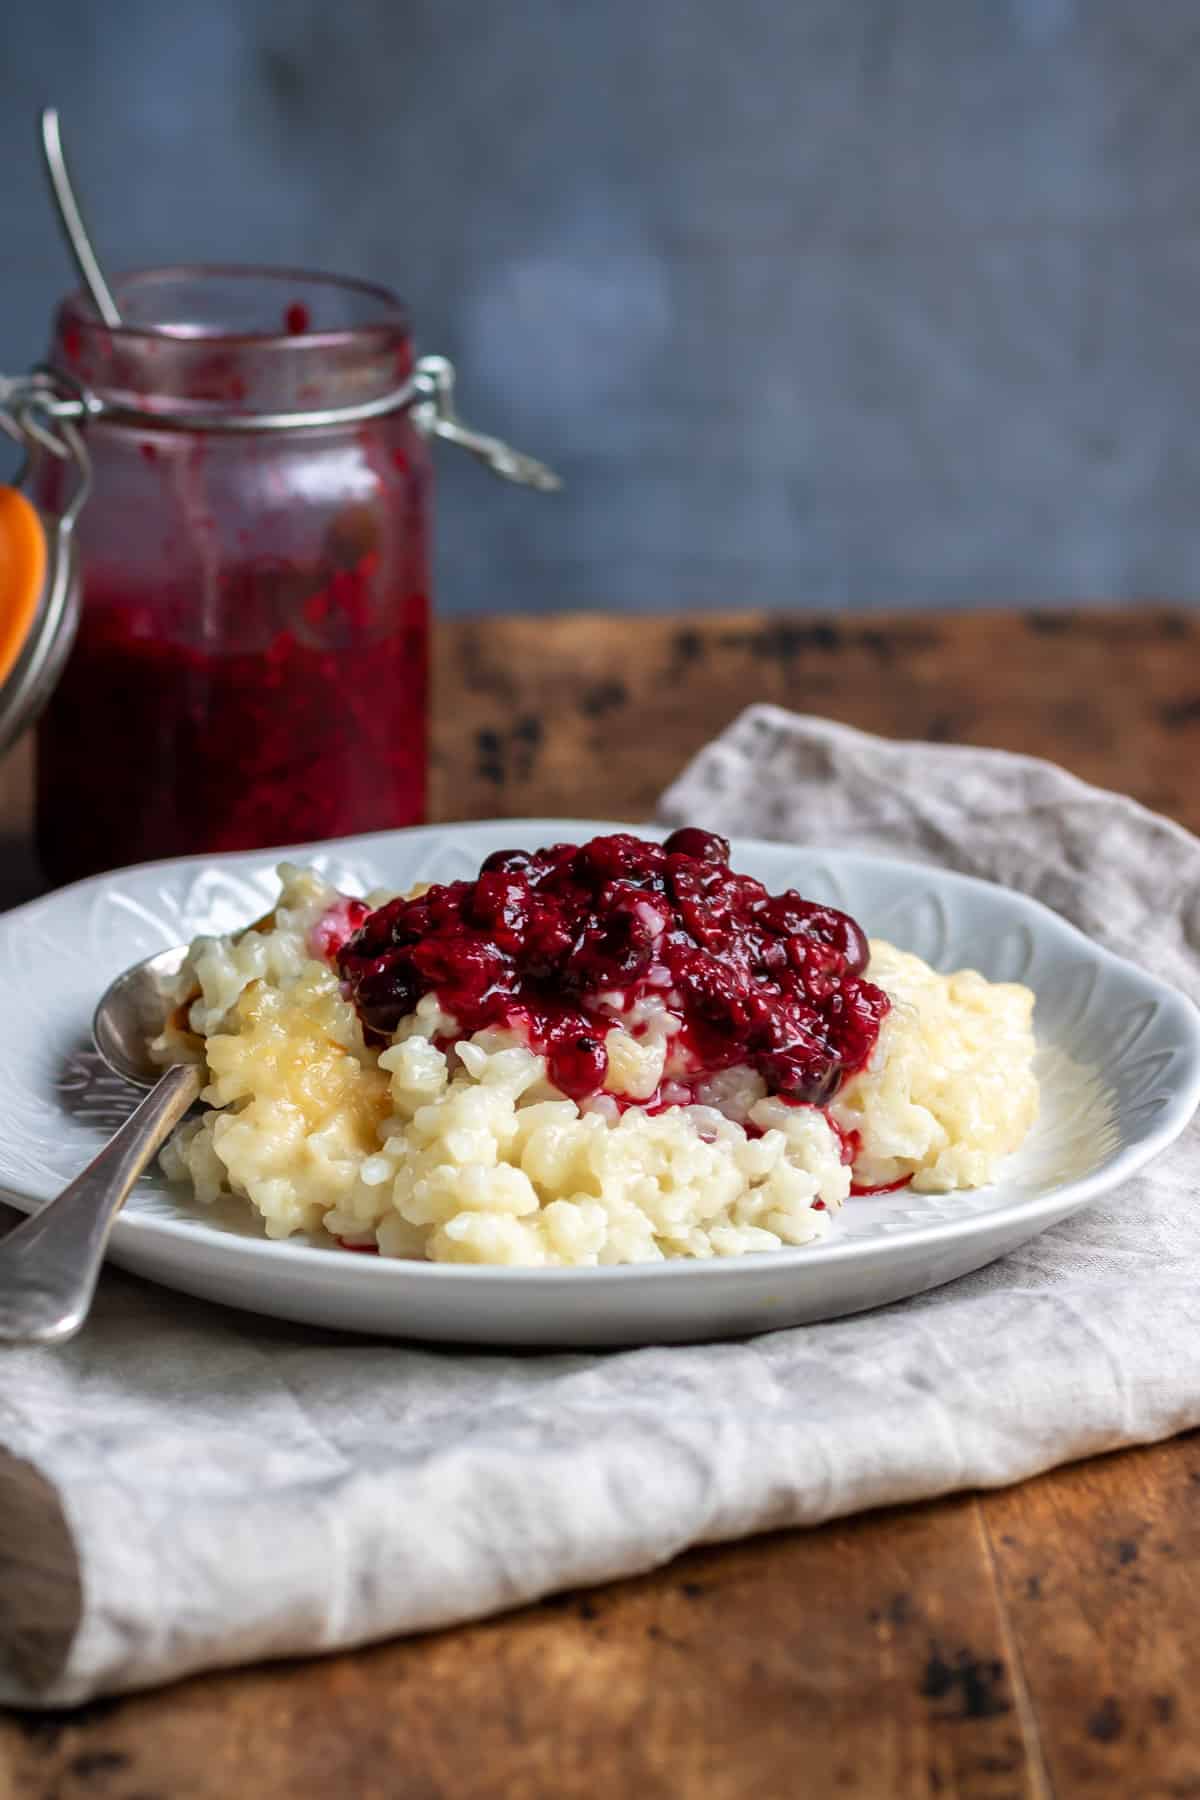 Plate of vegan rice pudding topped with berry sauce.